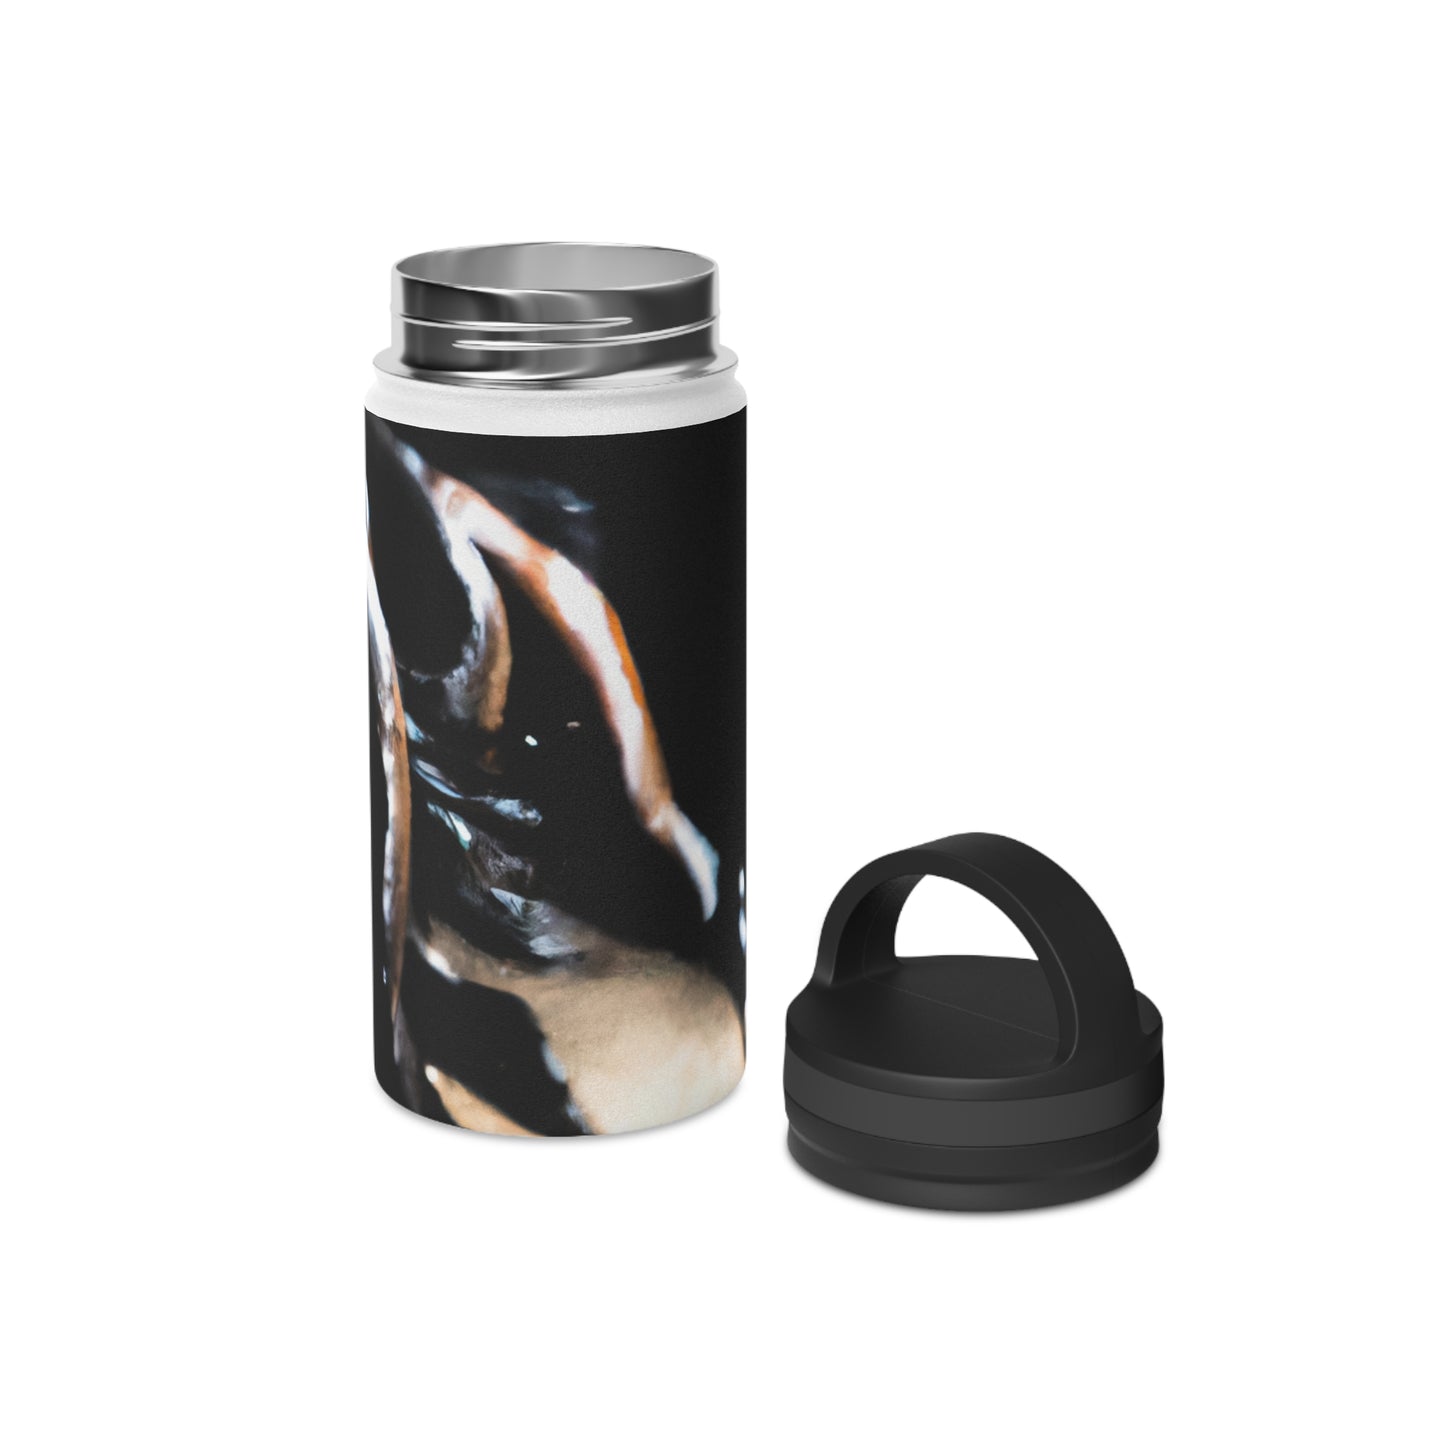 Dynamic Movements in Motion: Capturing the Energy of Sport Through Art - Go Plus Stainless Steel Water Bottle, Handle Lid